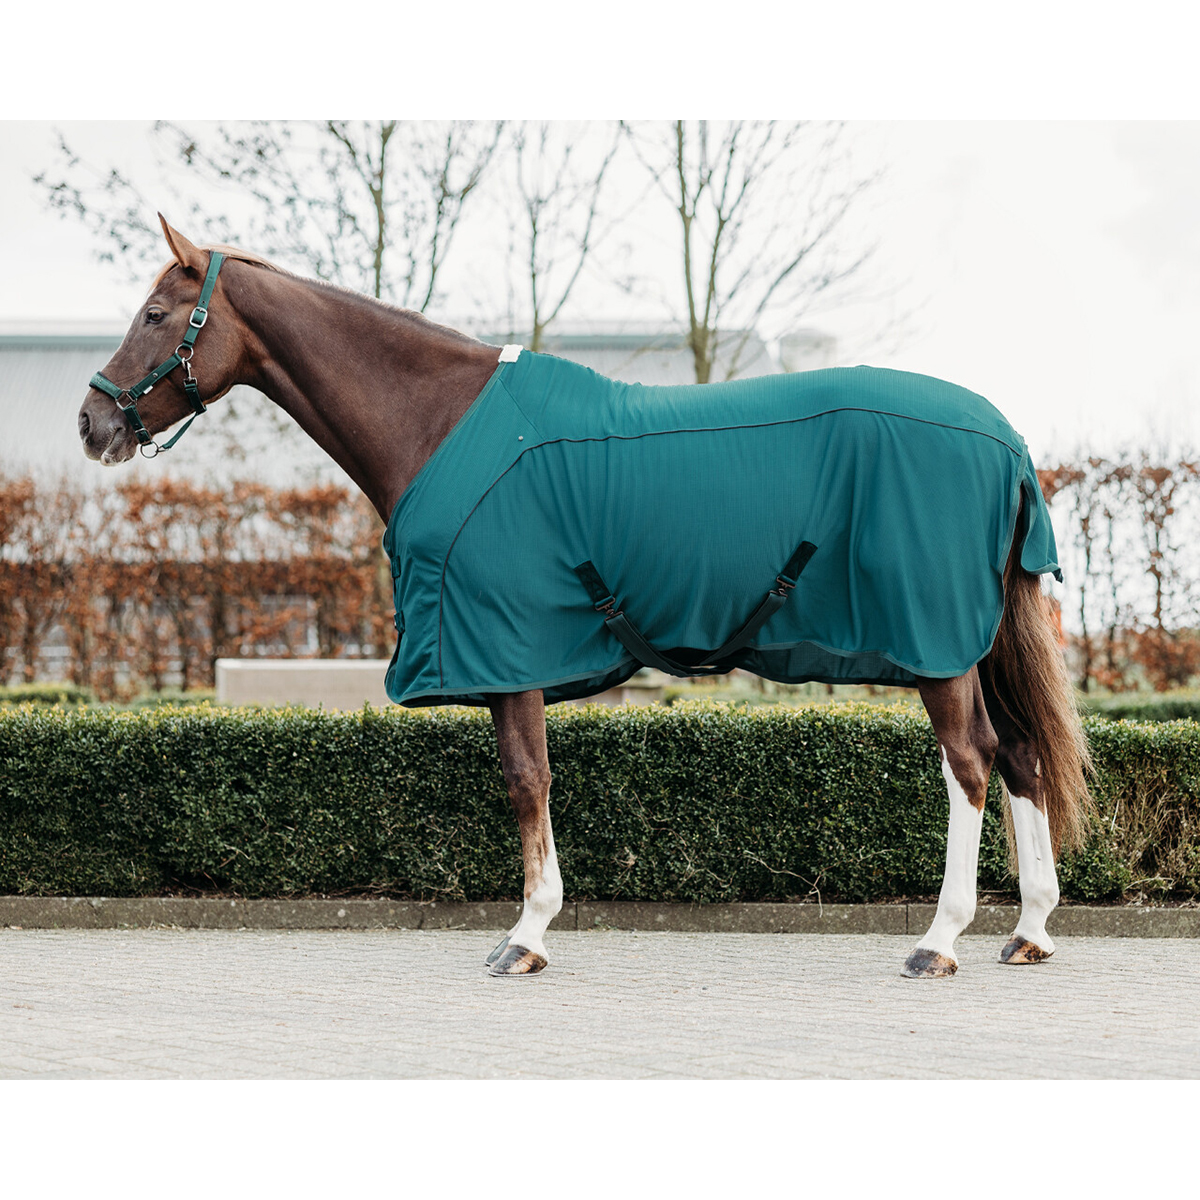 GREEN CHECK WAFFLE RUG/COOLER 4'9" TO 7'3 "by Top Horse uk 